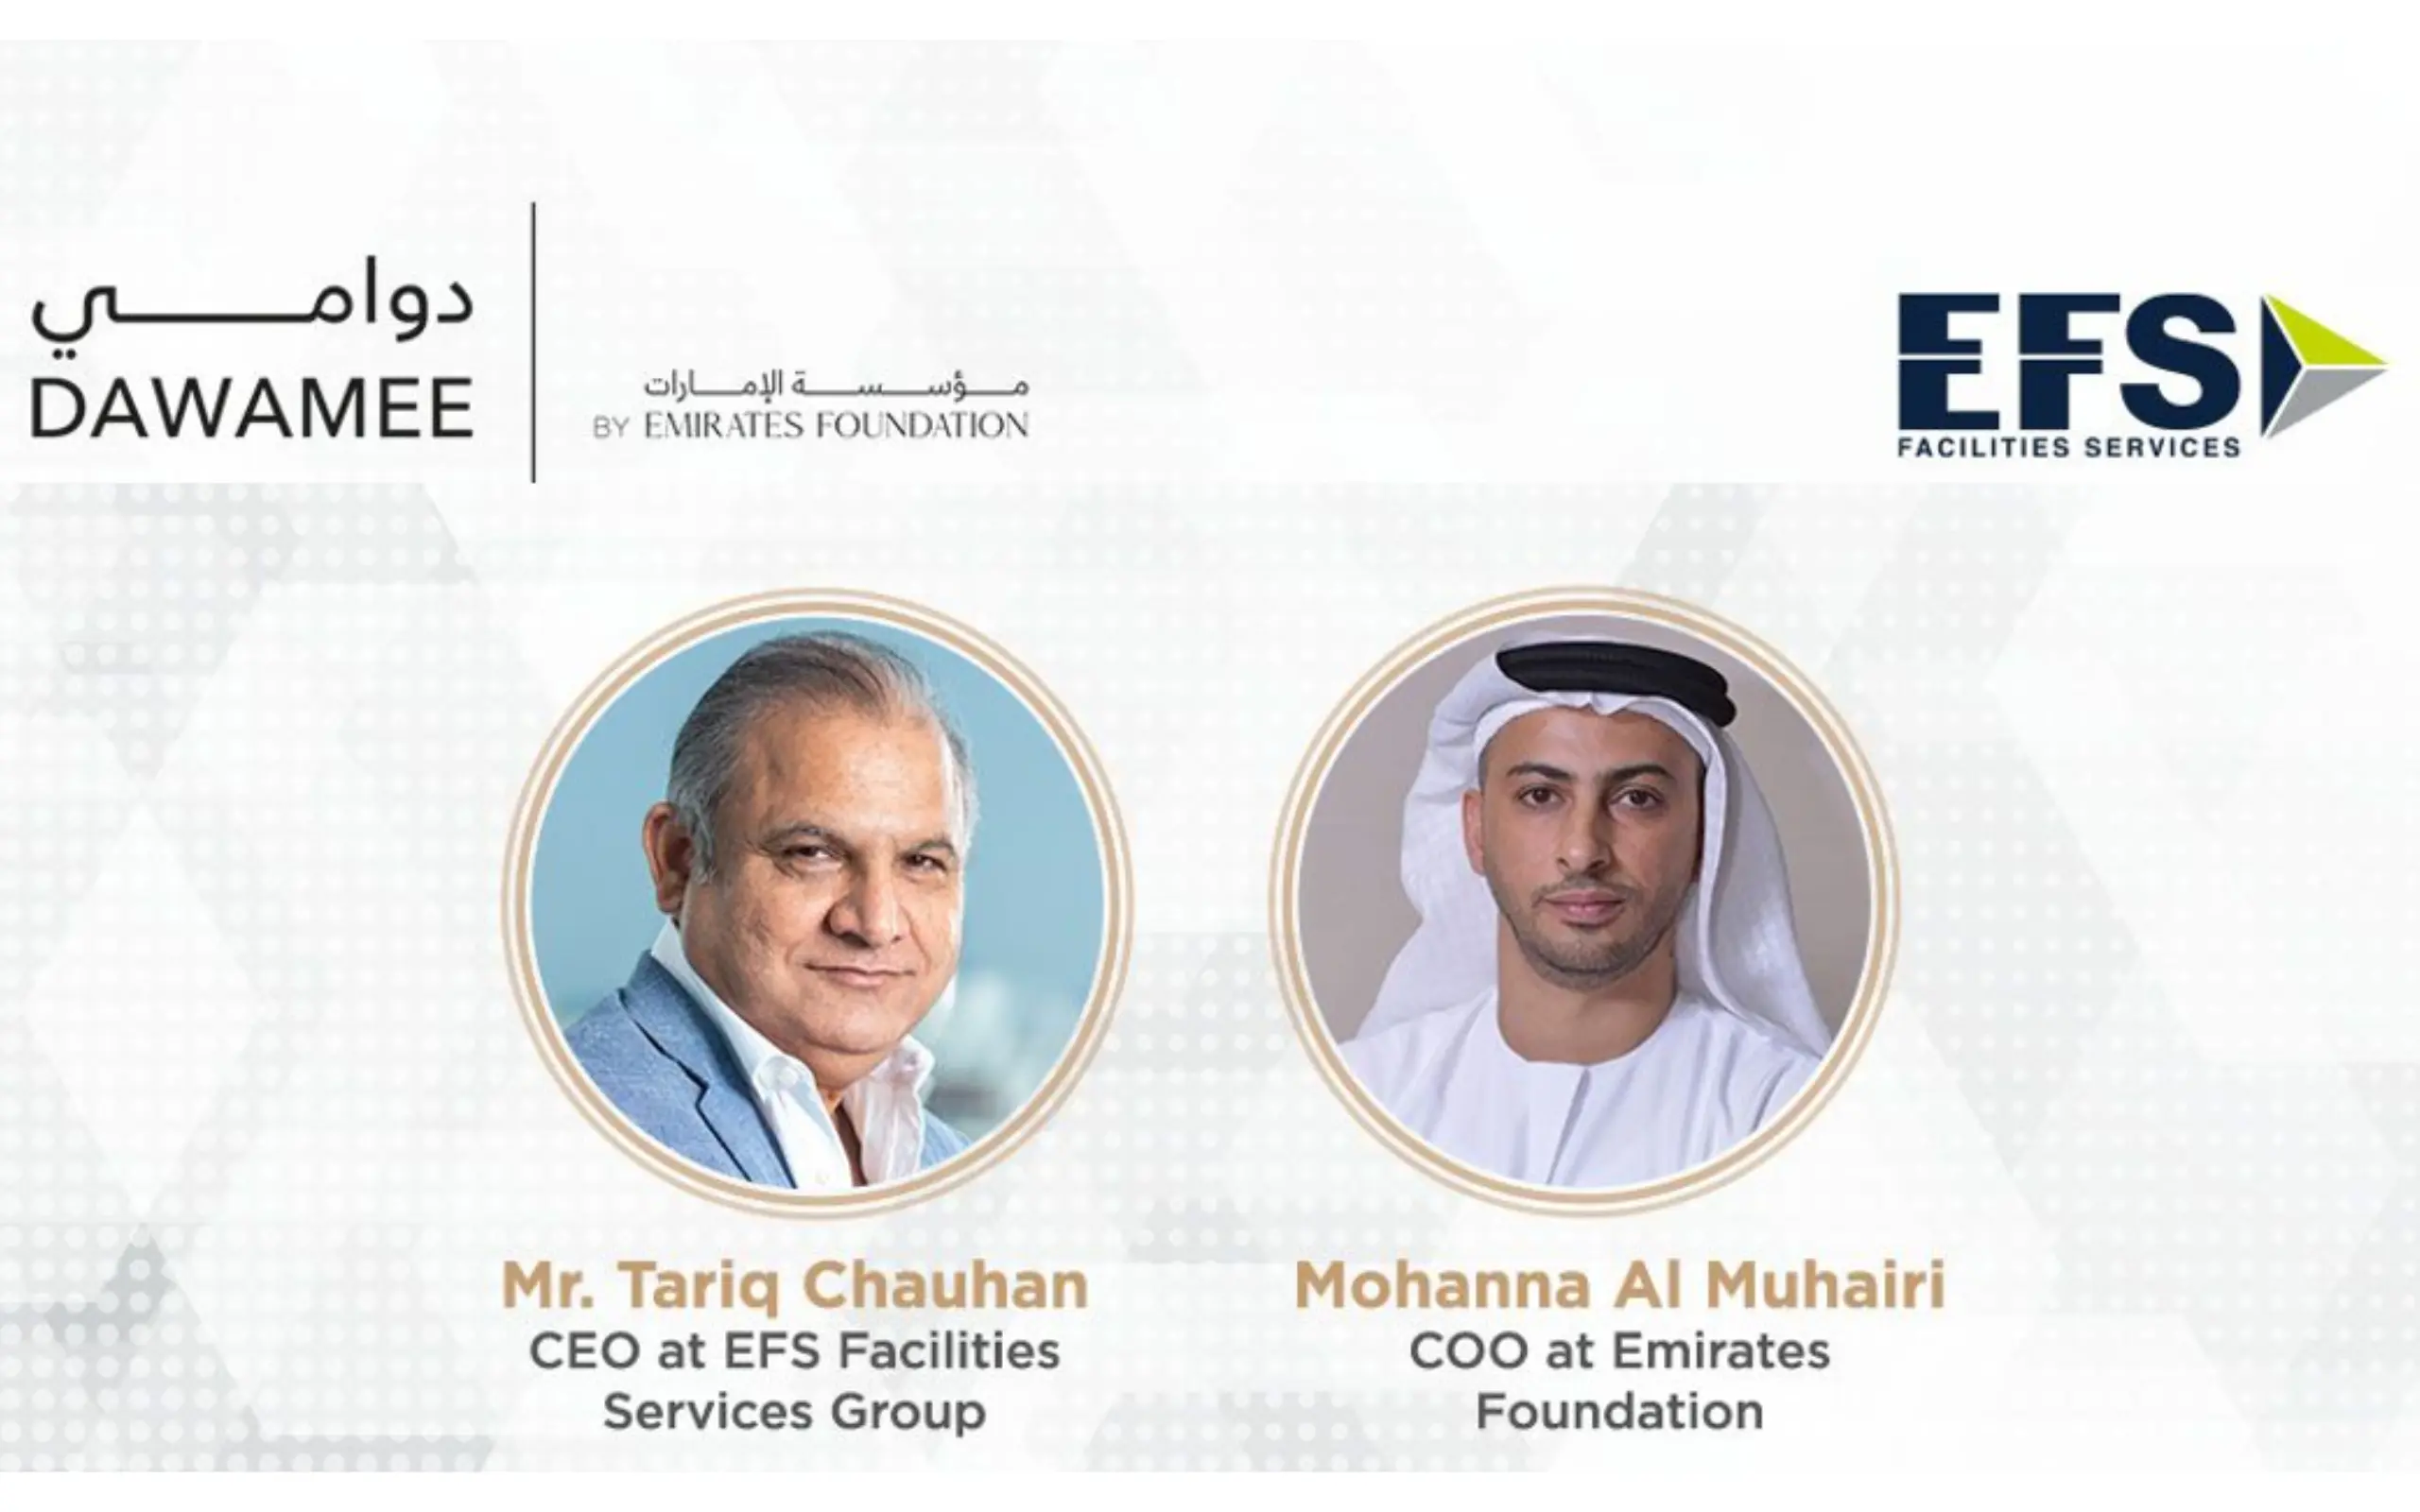 Emirates-Foundation-the-job-inside-webinar-discusses-the-enrollment-of-Emiratis-in-the-workforce-through-Dawamee